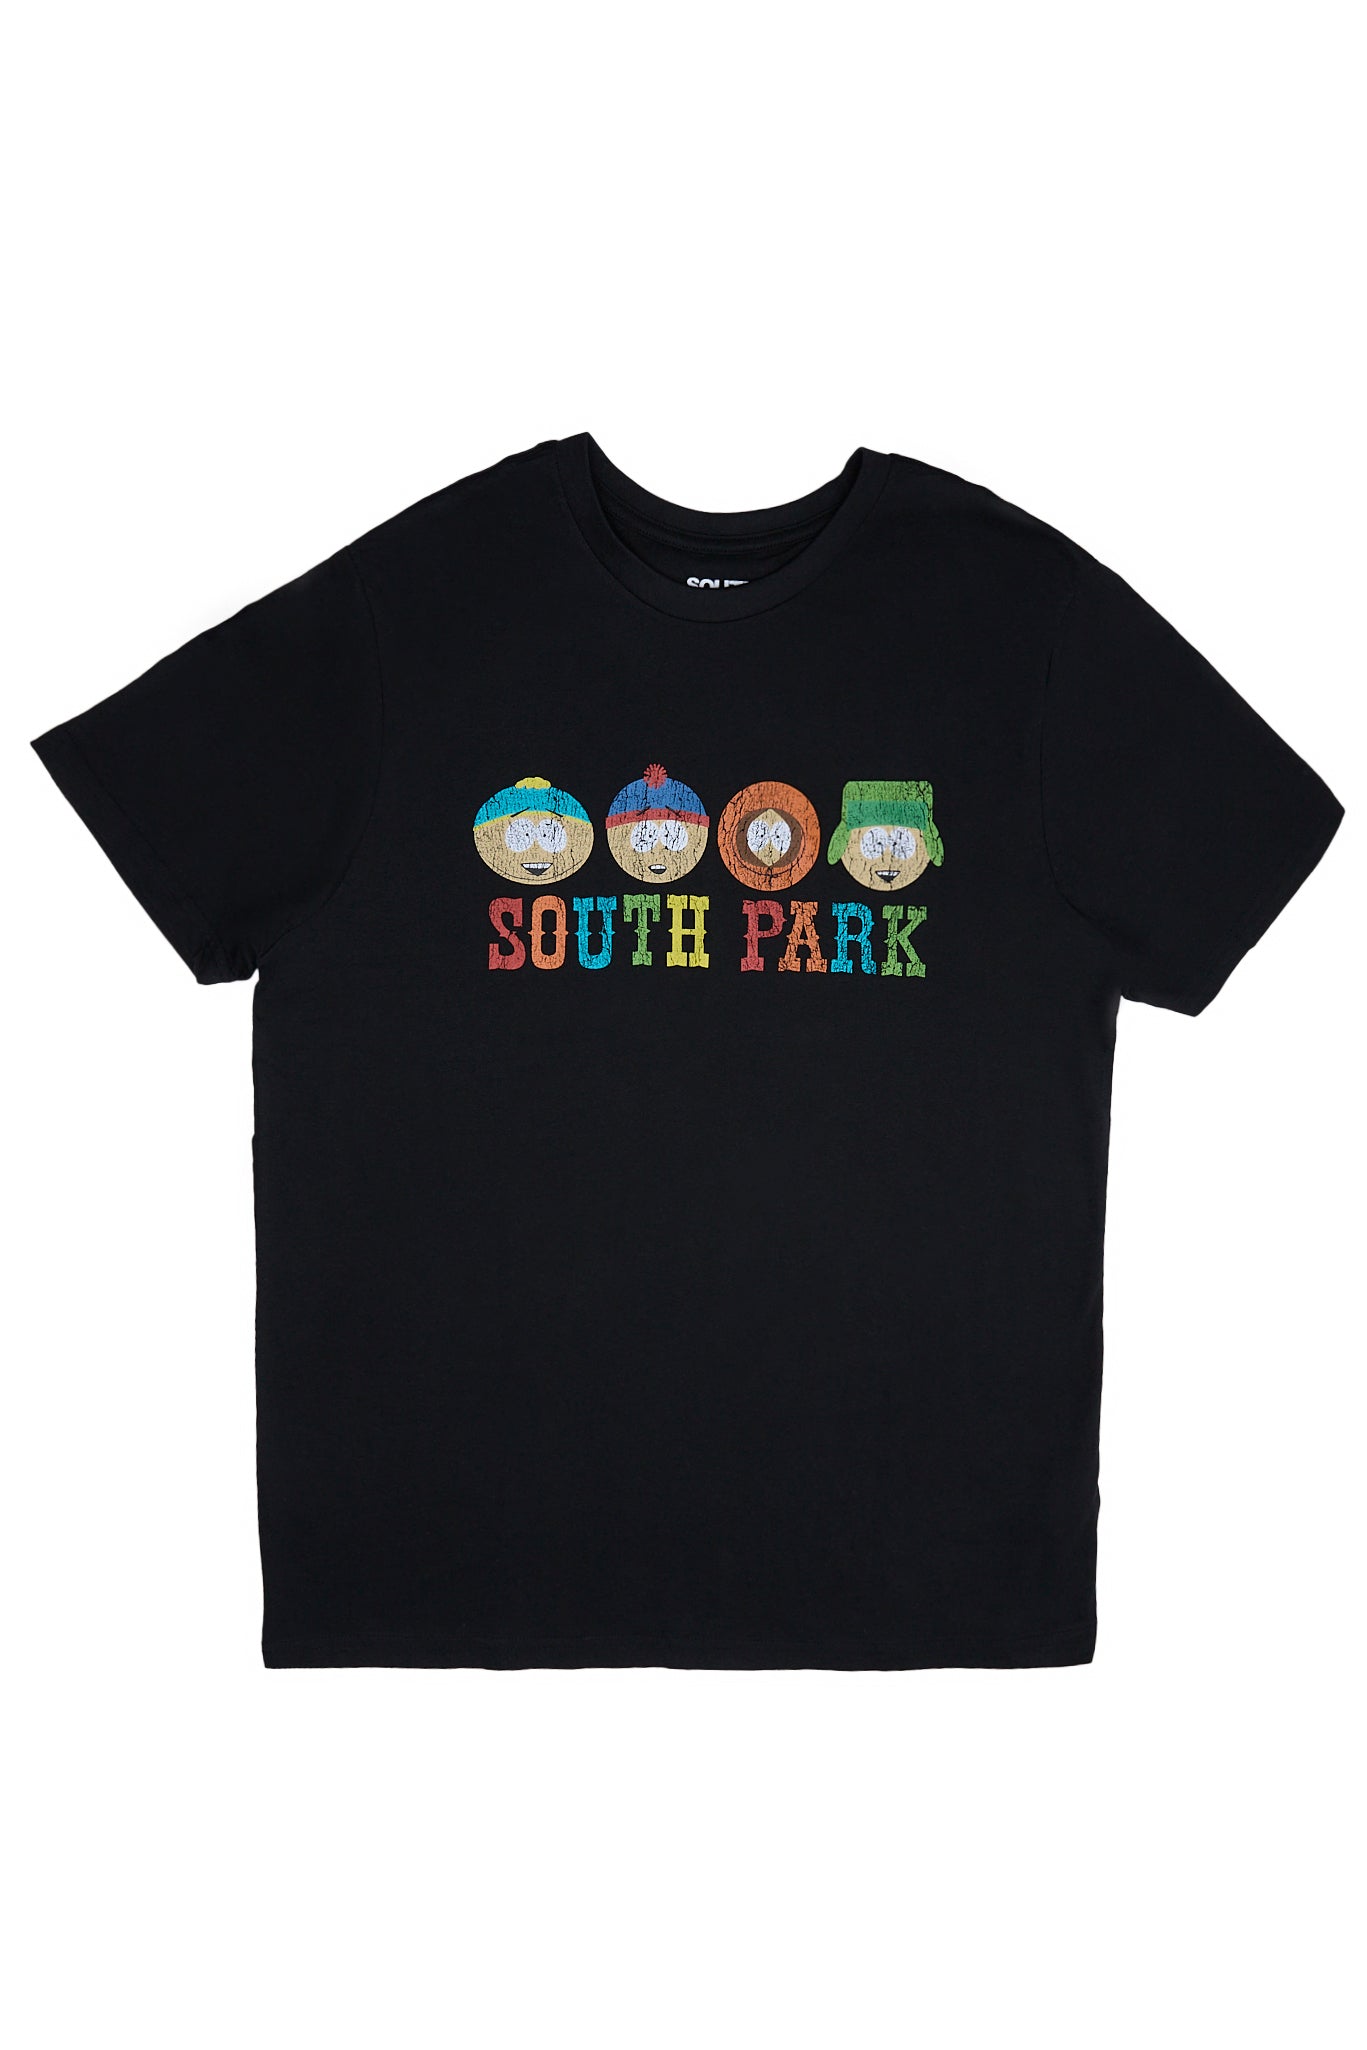 South Park Graphic Tee